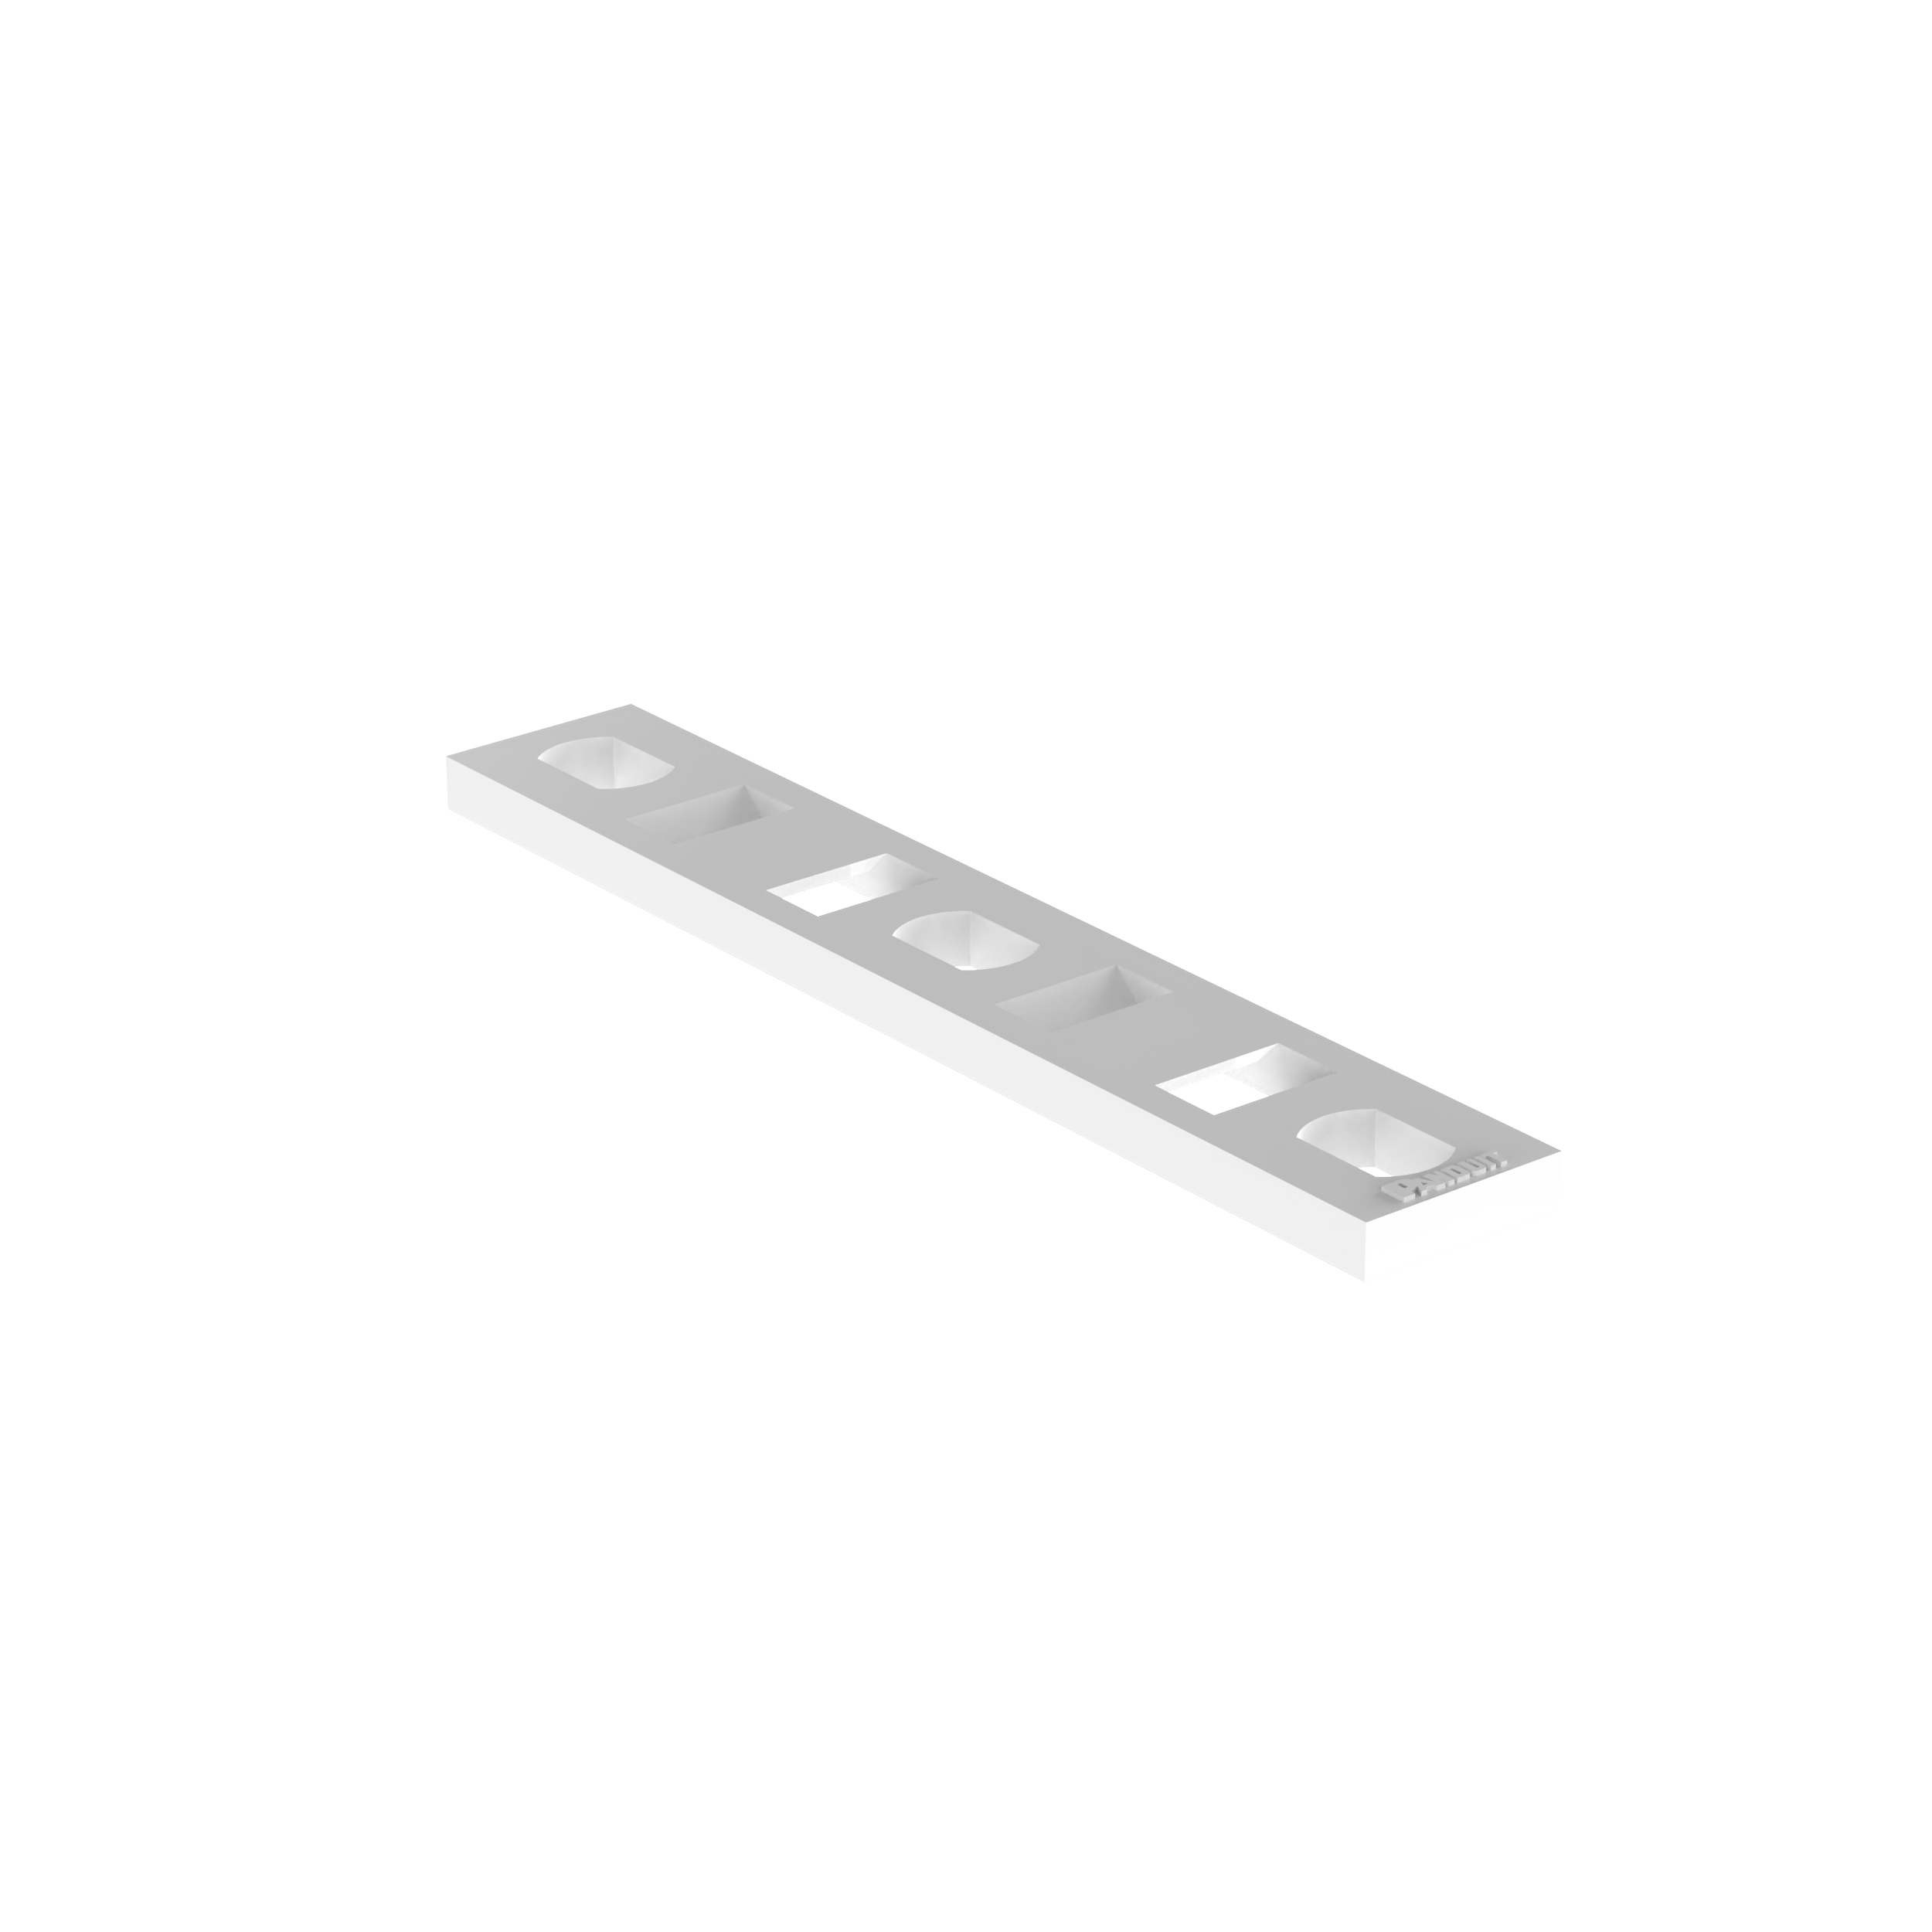 MTP2S-E10-C Tie Plate, Natural, PA 6.6, 3x0.5", #10 Screw, PK100